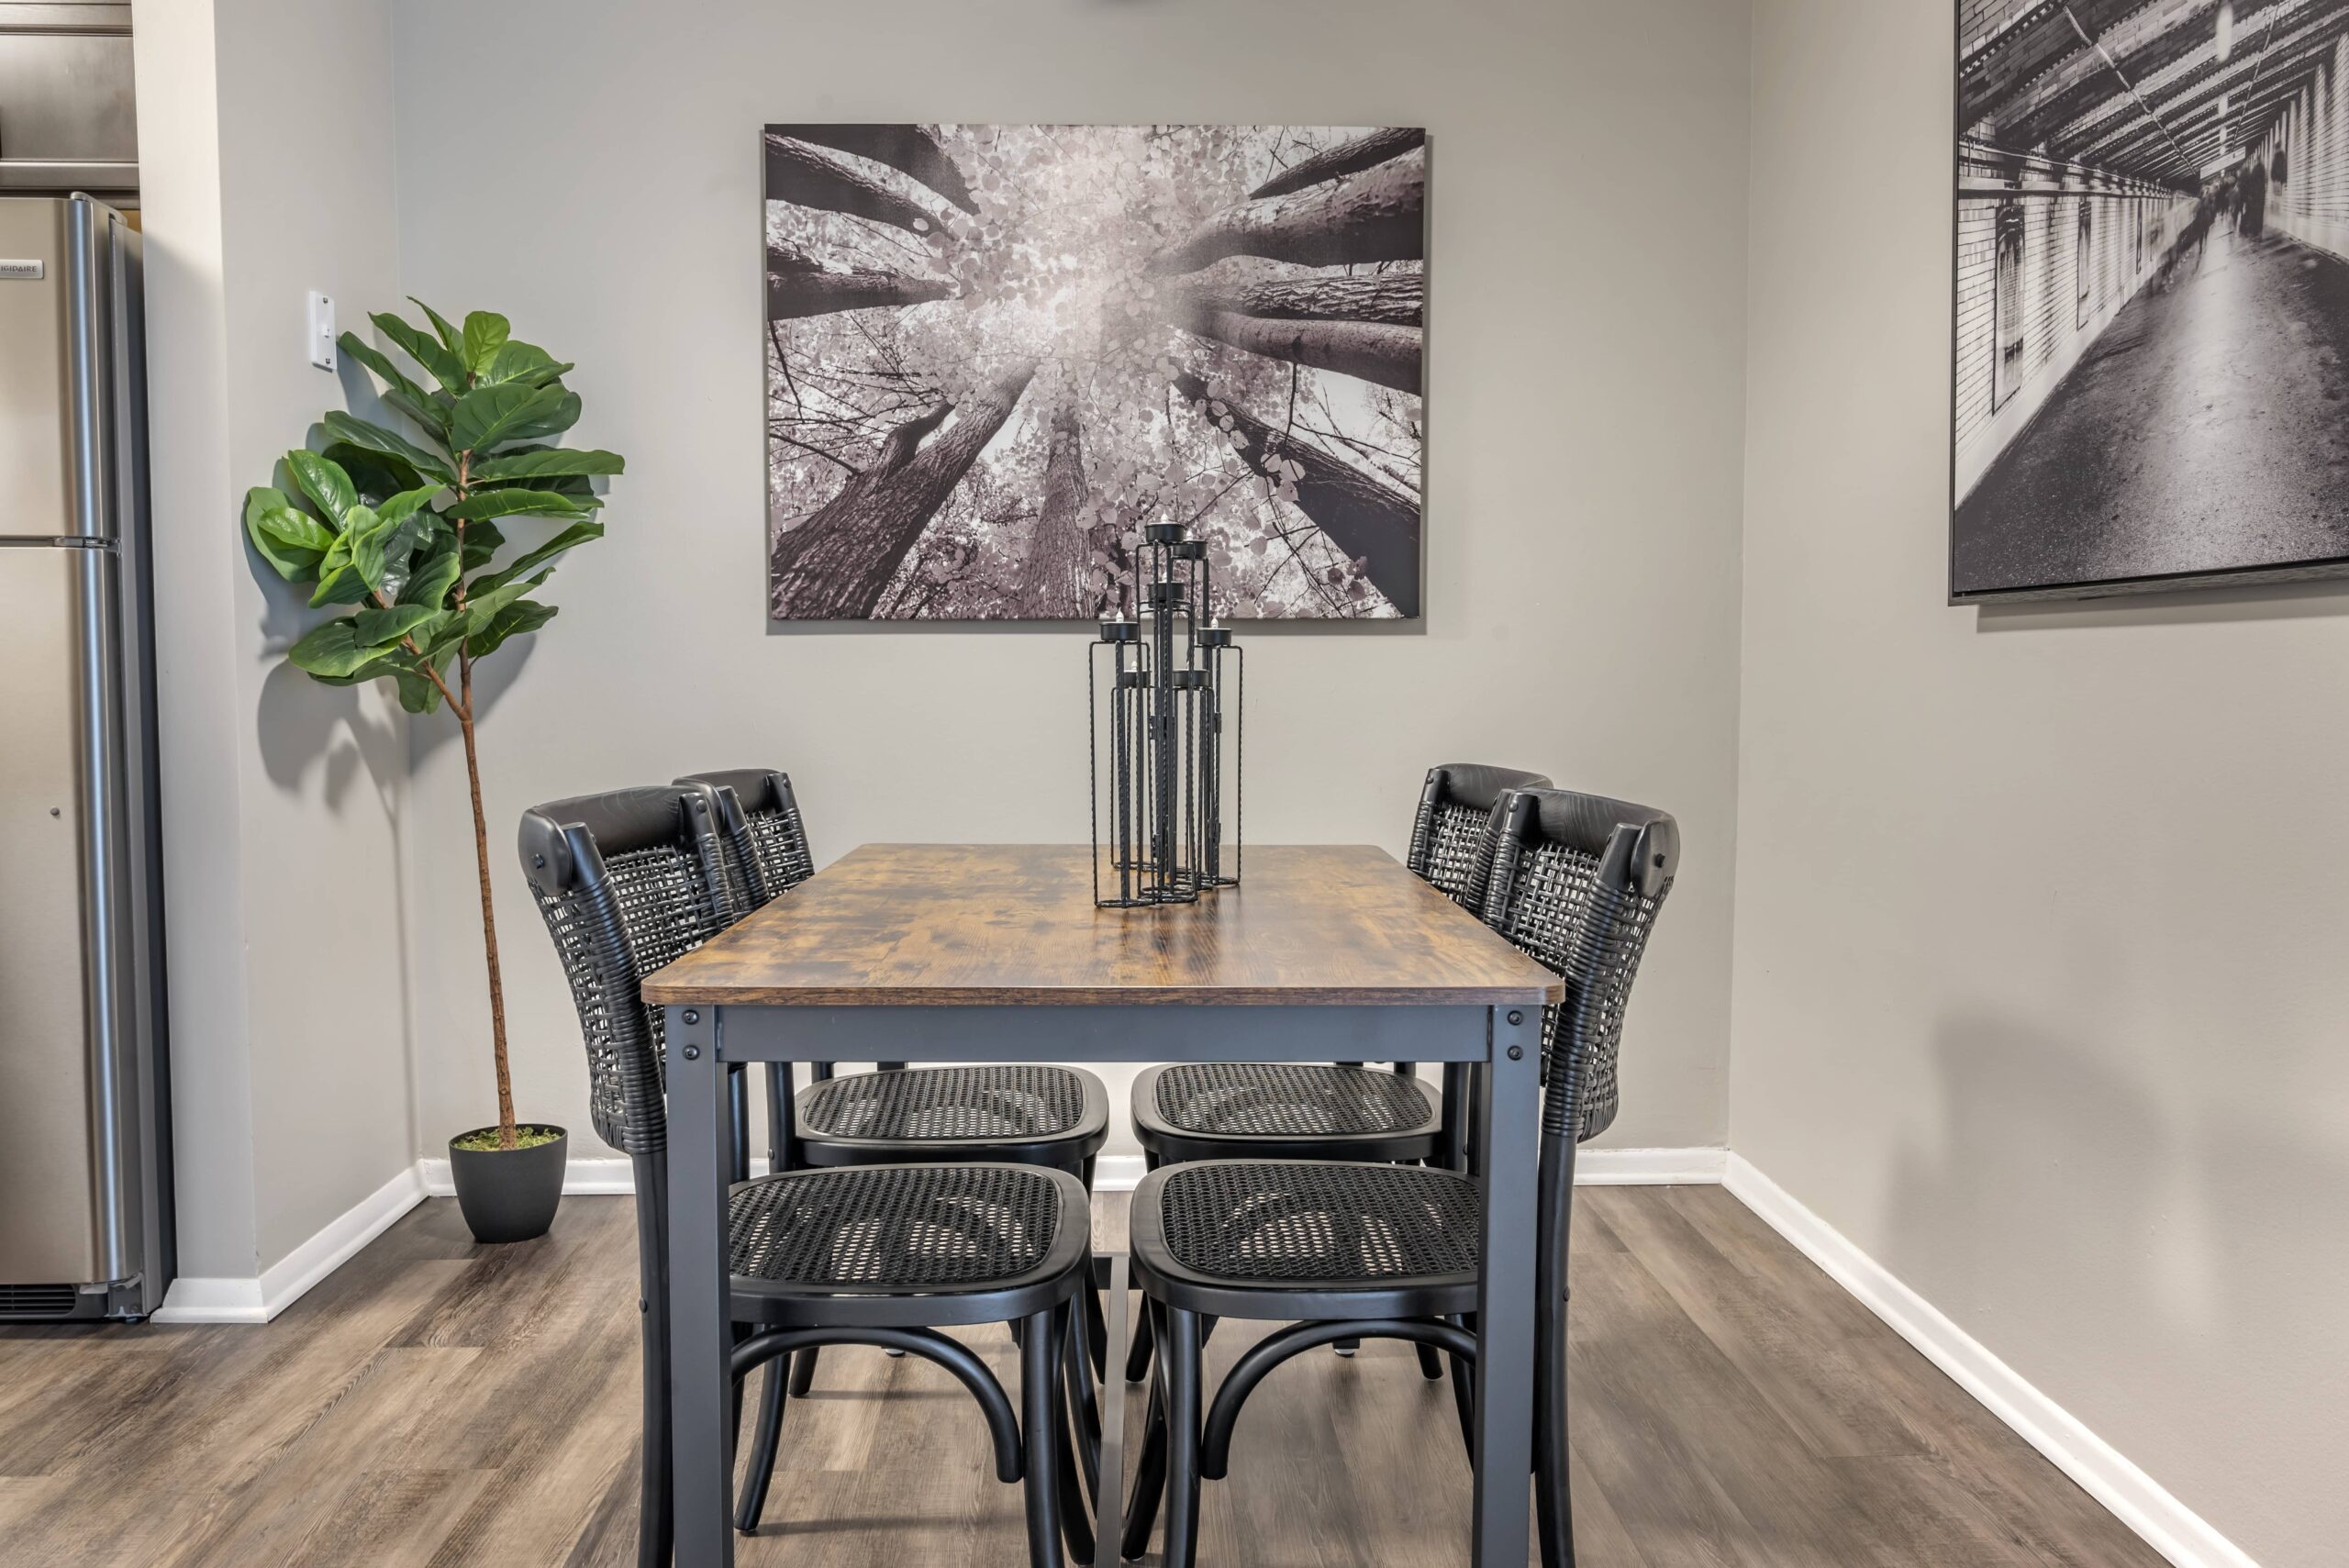 Image of dining room details from Model55 apartment design